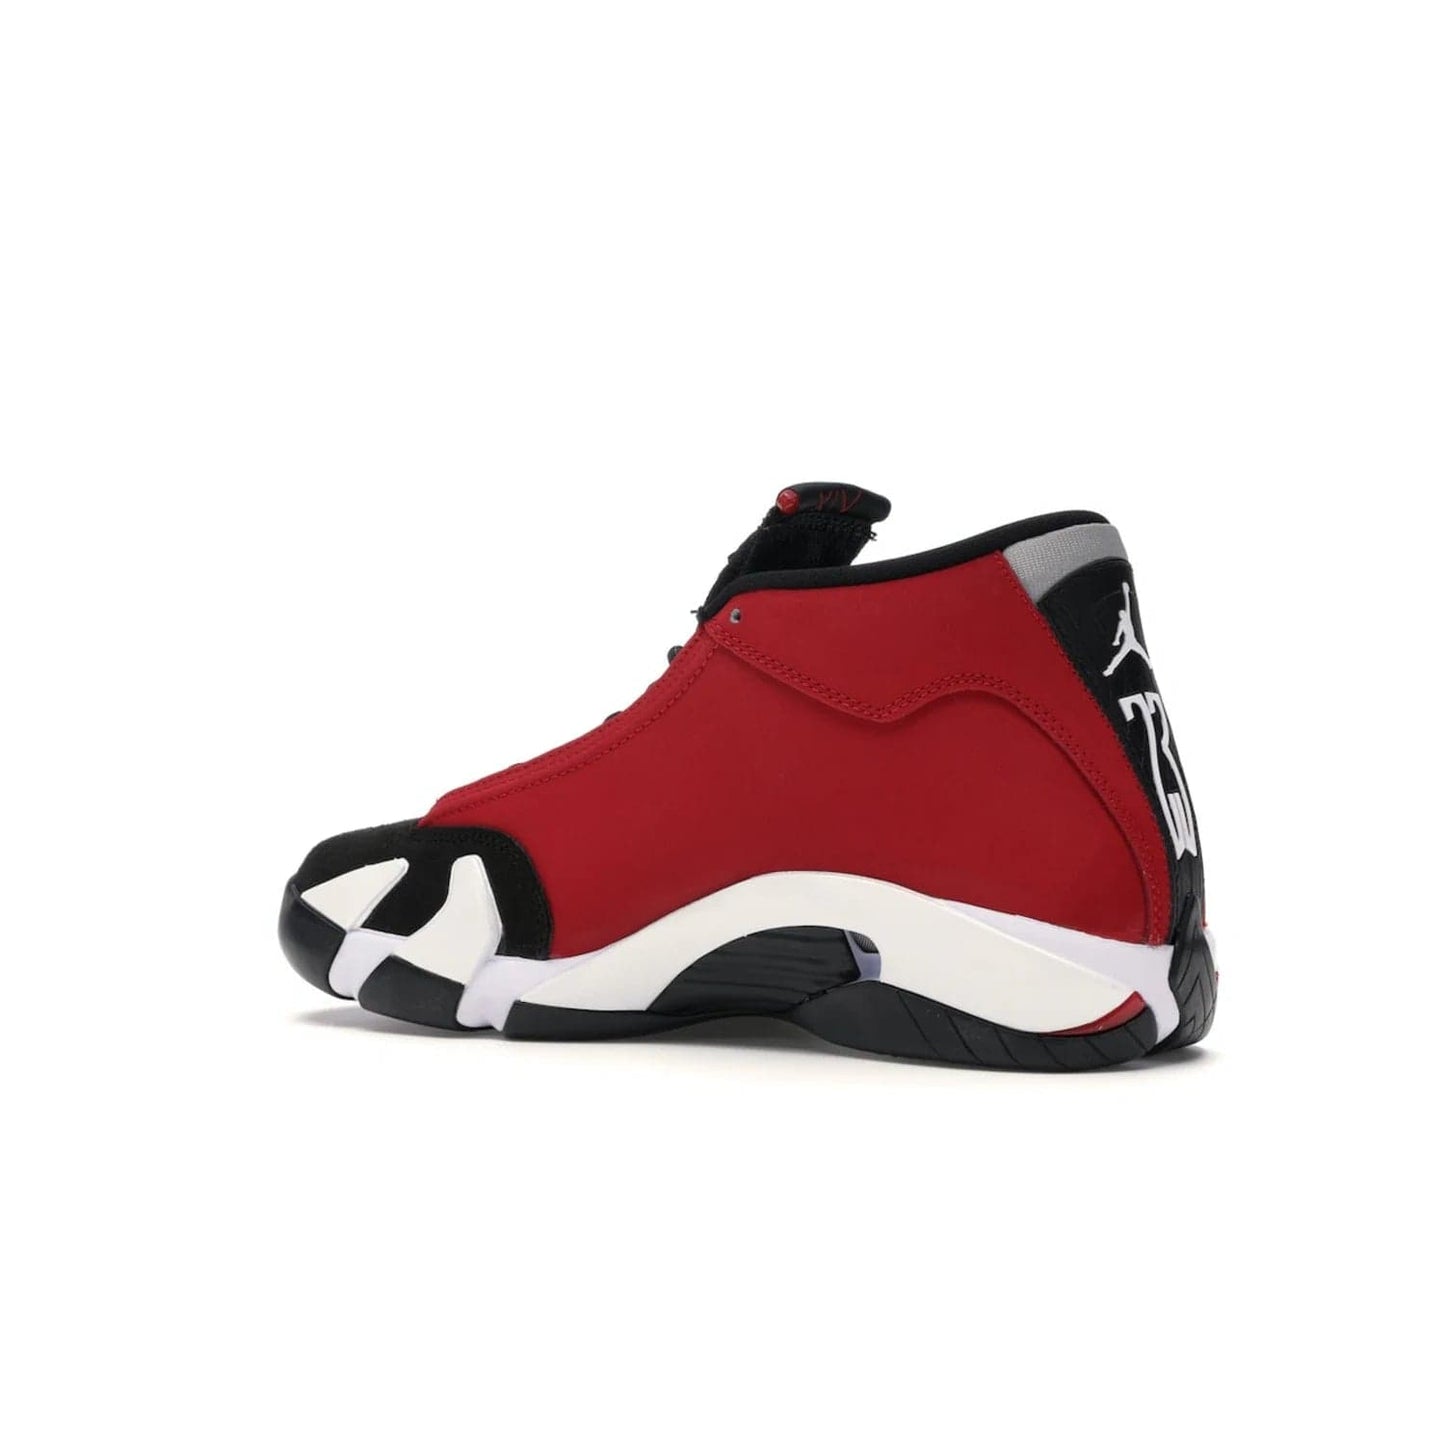 Jordan 14 Retro Gym Red Toro - Image 22 - Only at www.BallersClubKickz.com - Feel the Chicago Bulls energy with the Jordan 14 Retro Gym Red Toro! Black, red, and white design unites performance and fashion. Get your hands on this limited edition Jordan and show off your style today.